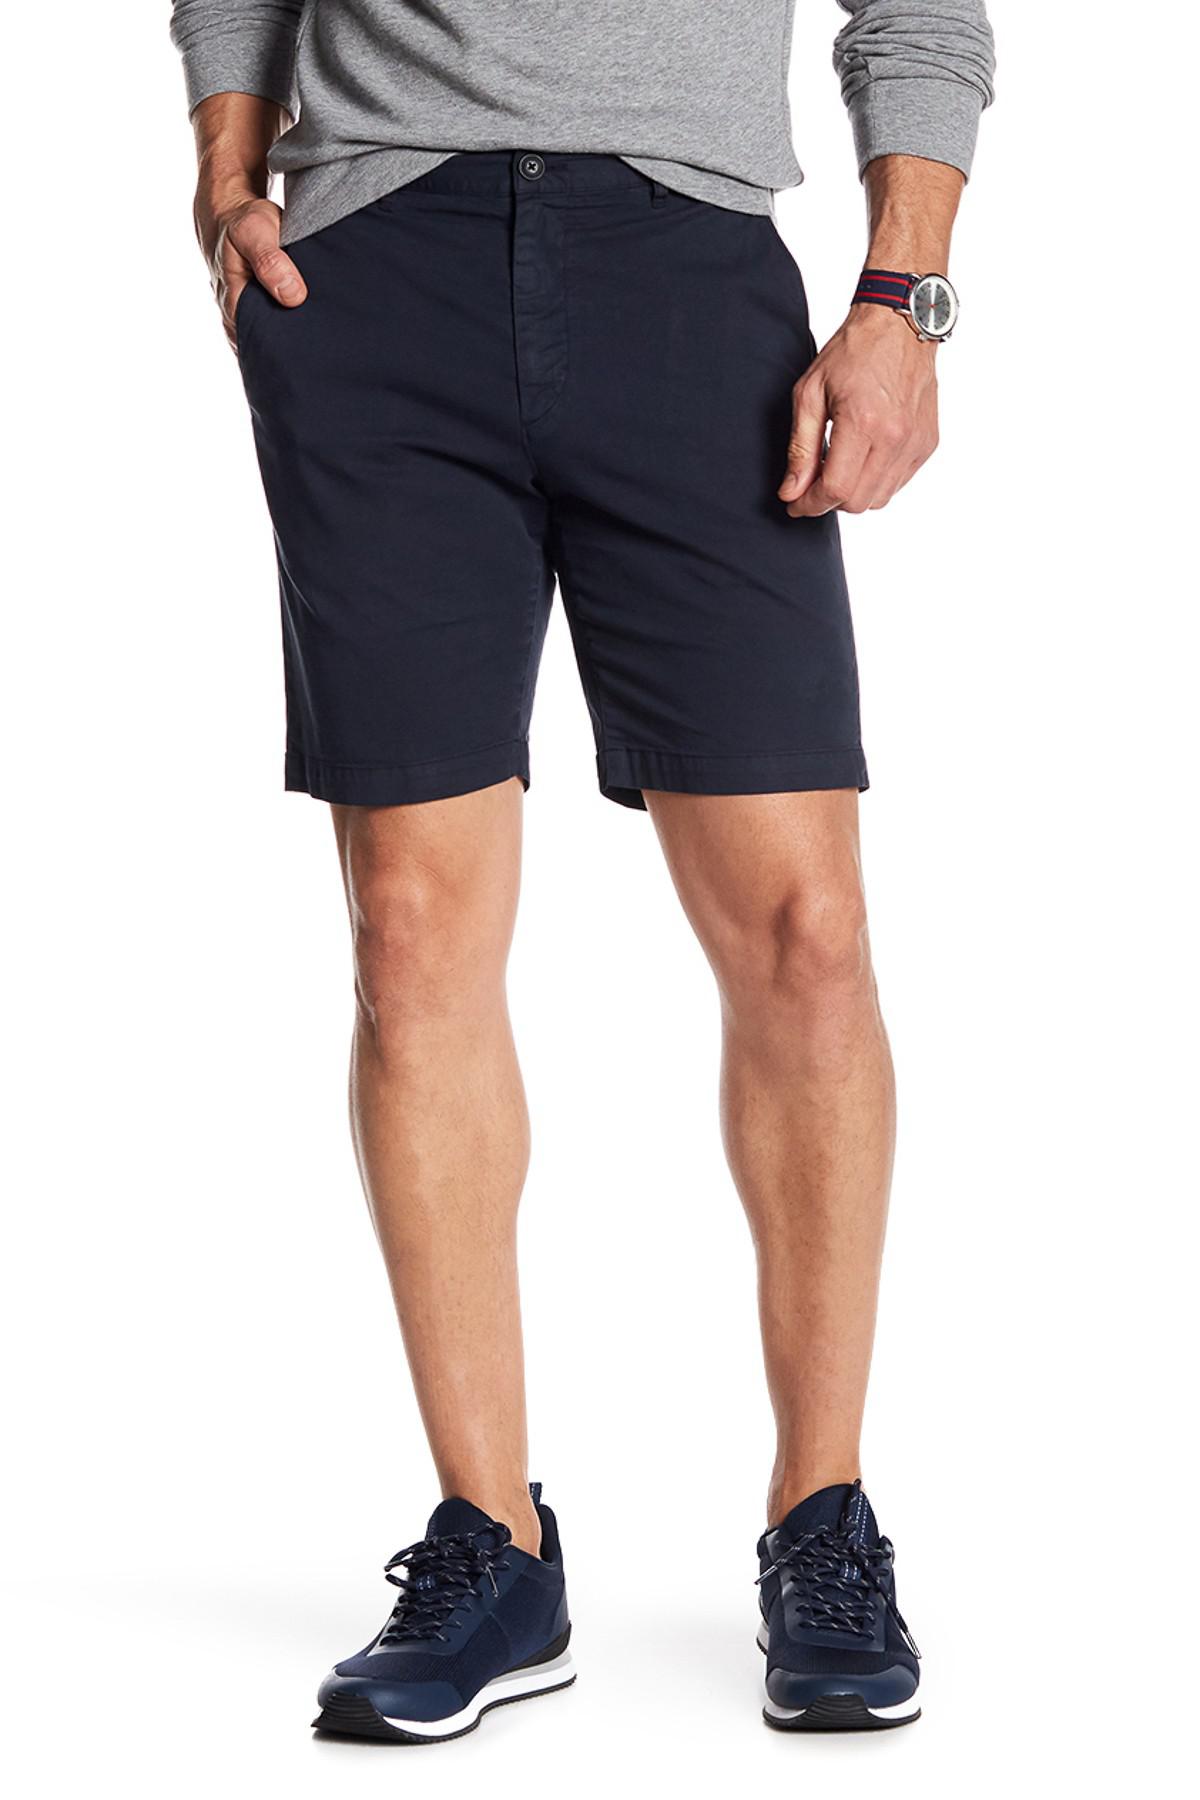 Lyst - Theory Zaine Shorts in Blue for Men